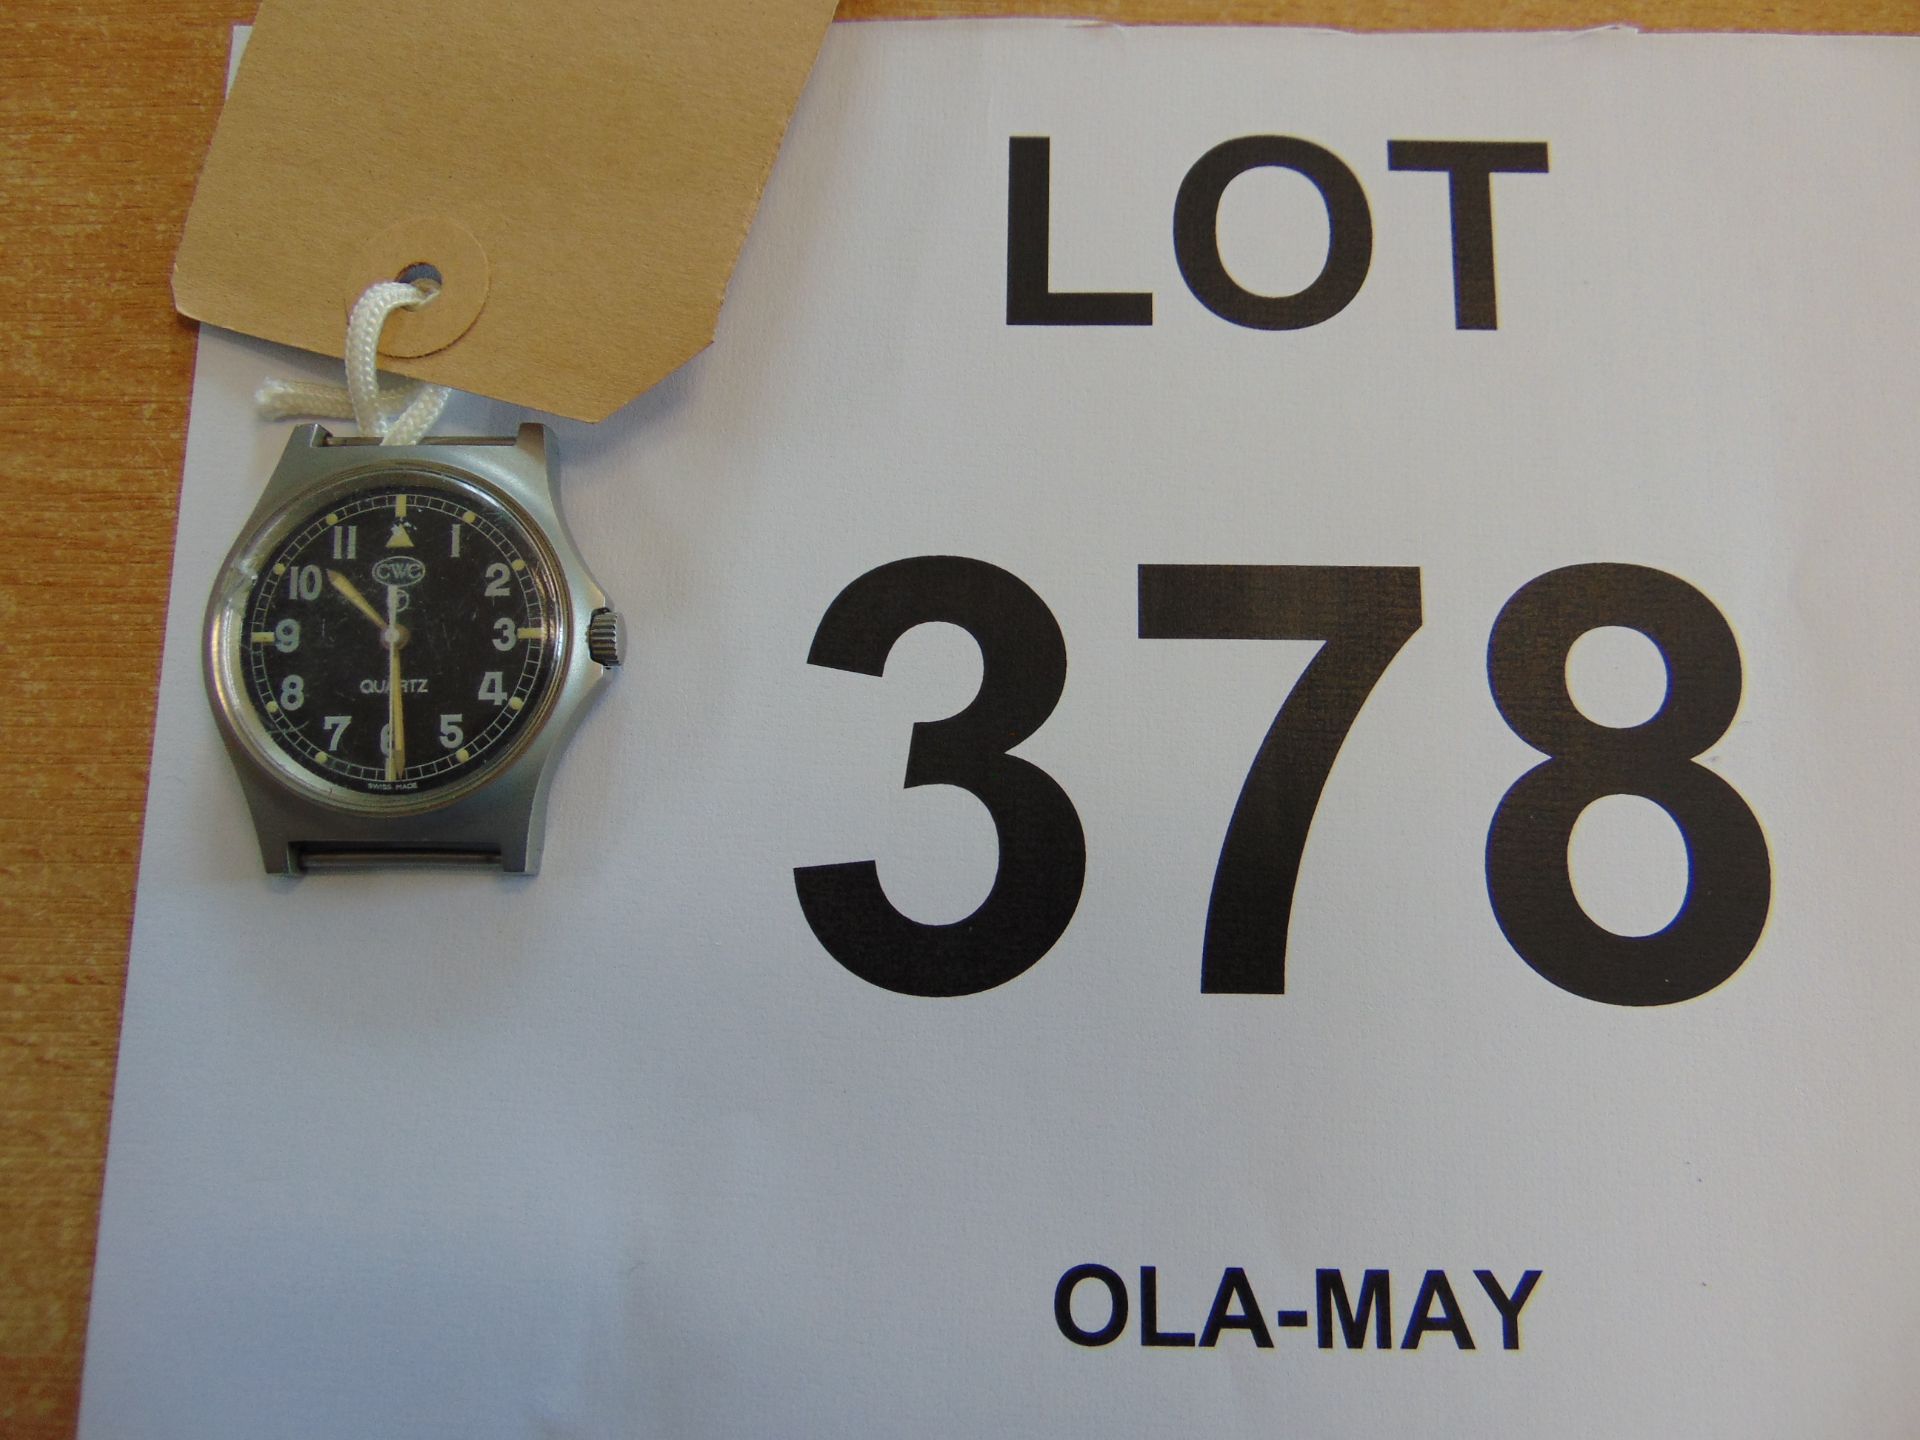 Rare CWC 0552 Royal Marines Issue Service Watch Nato Markings, Date 1990, Gulf War 1. Small Chip - Image 4 of 4